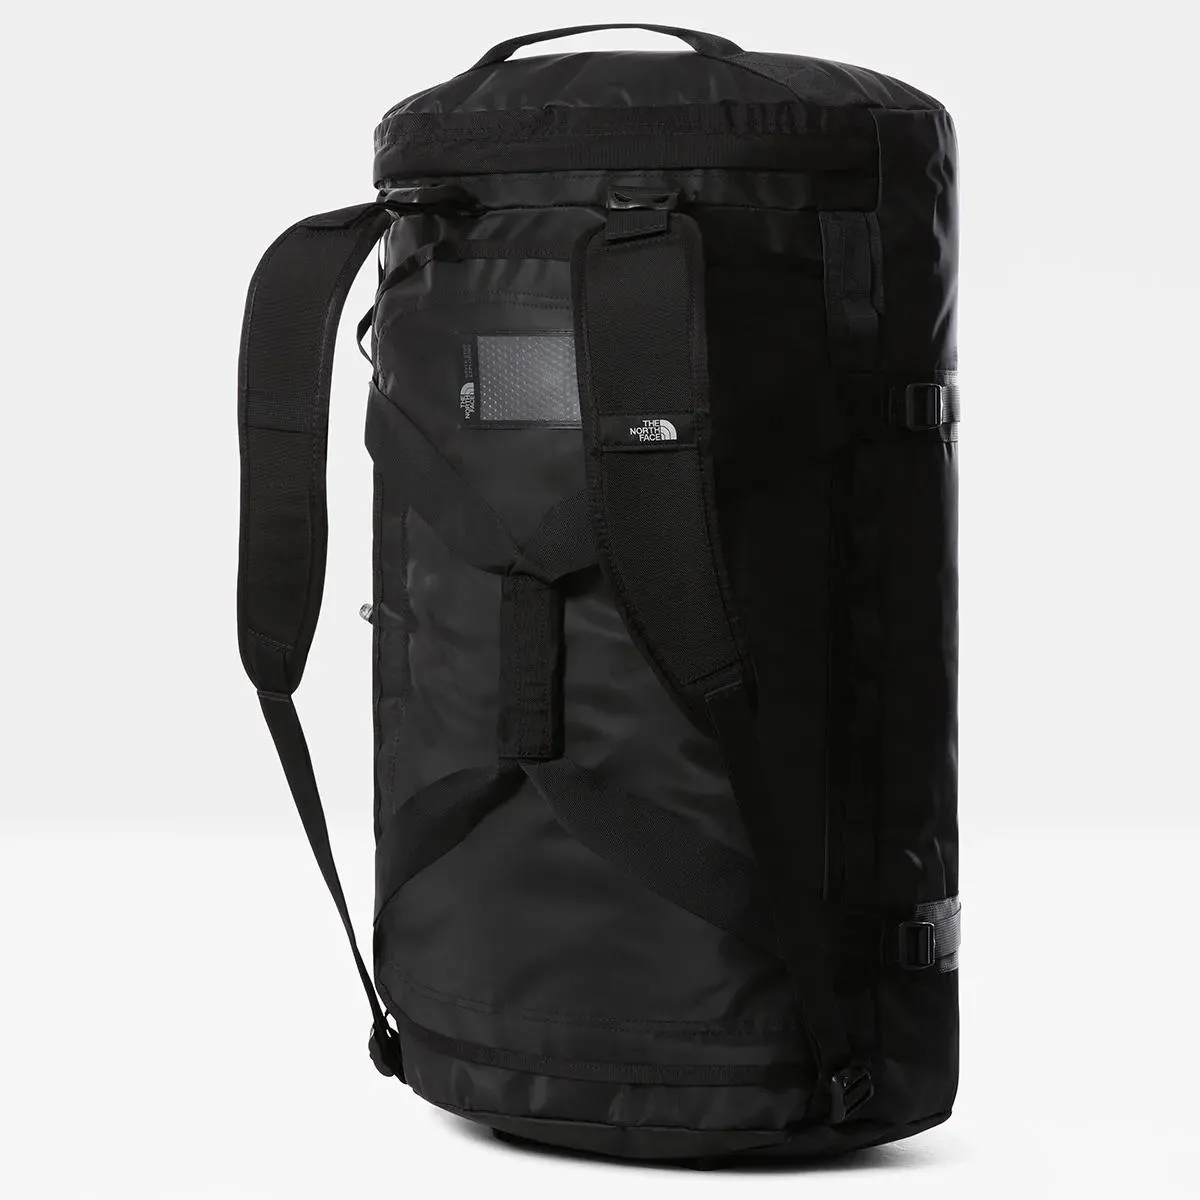 The North Face Torba Base Camp Duffel L 